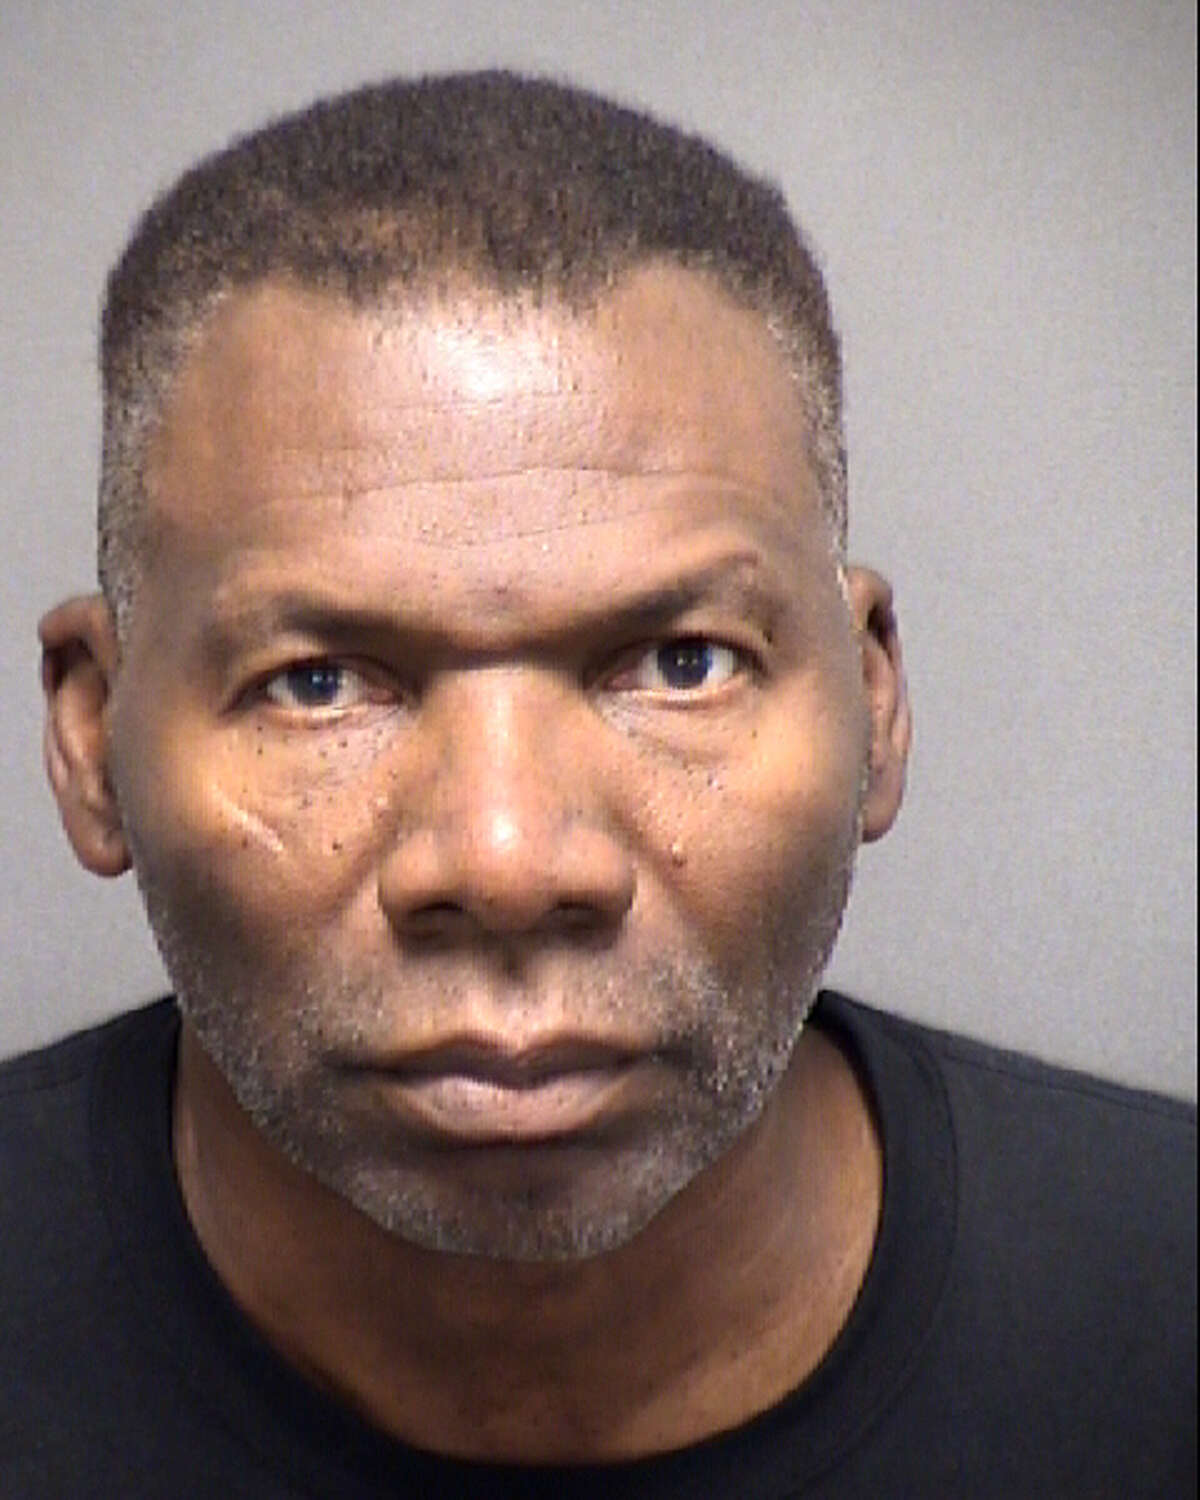 Stanley Washington was arrested on suspicion of two counts of sexual assault of a child.